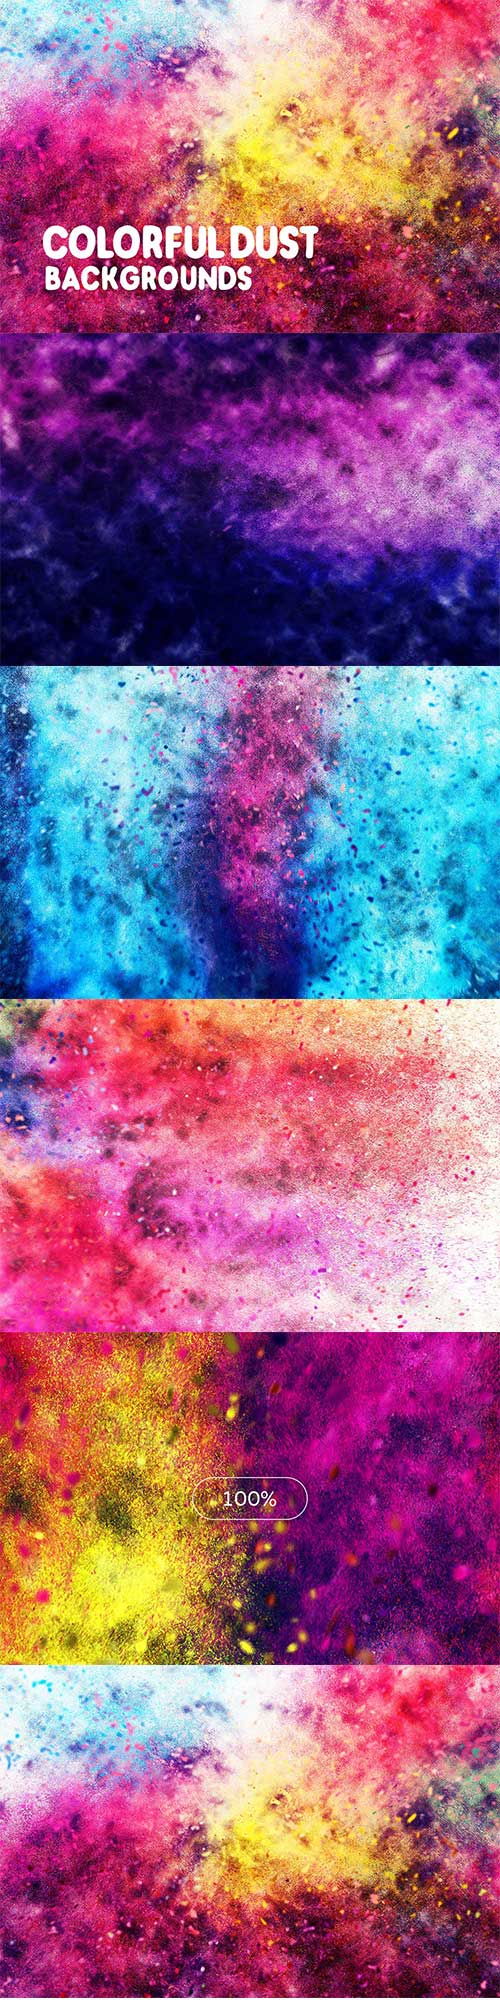 Colorful Dust Backgrounds